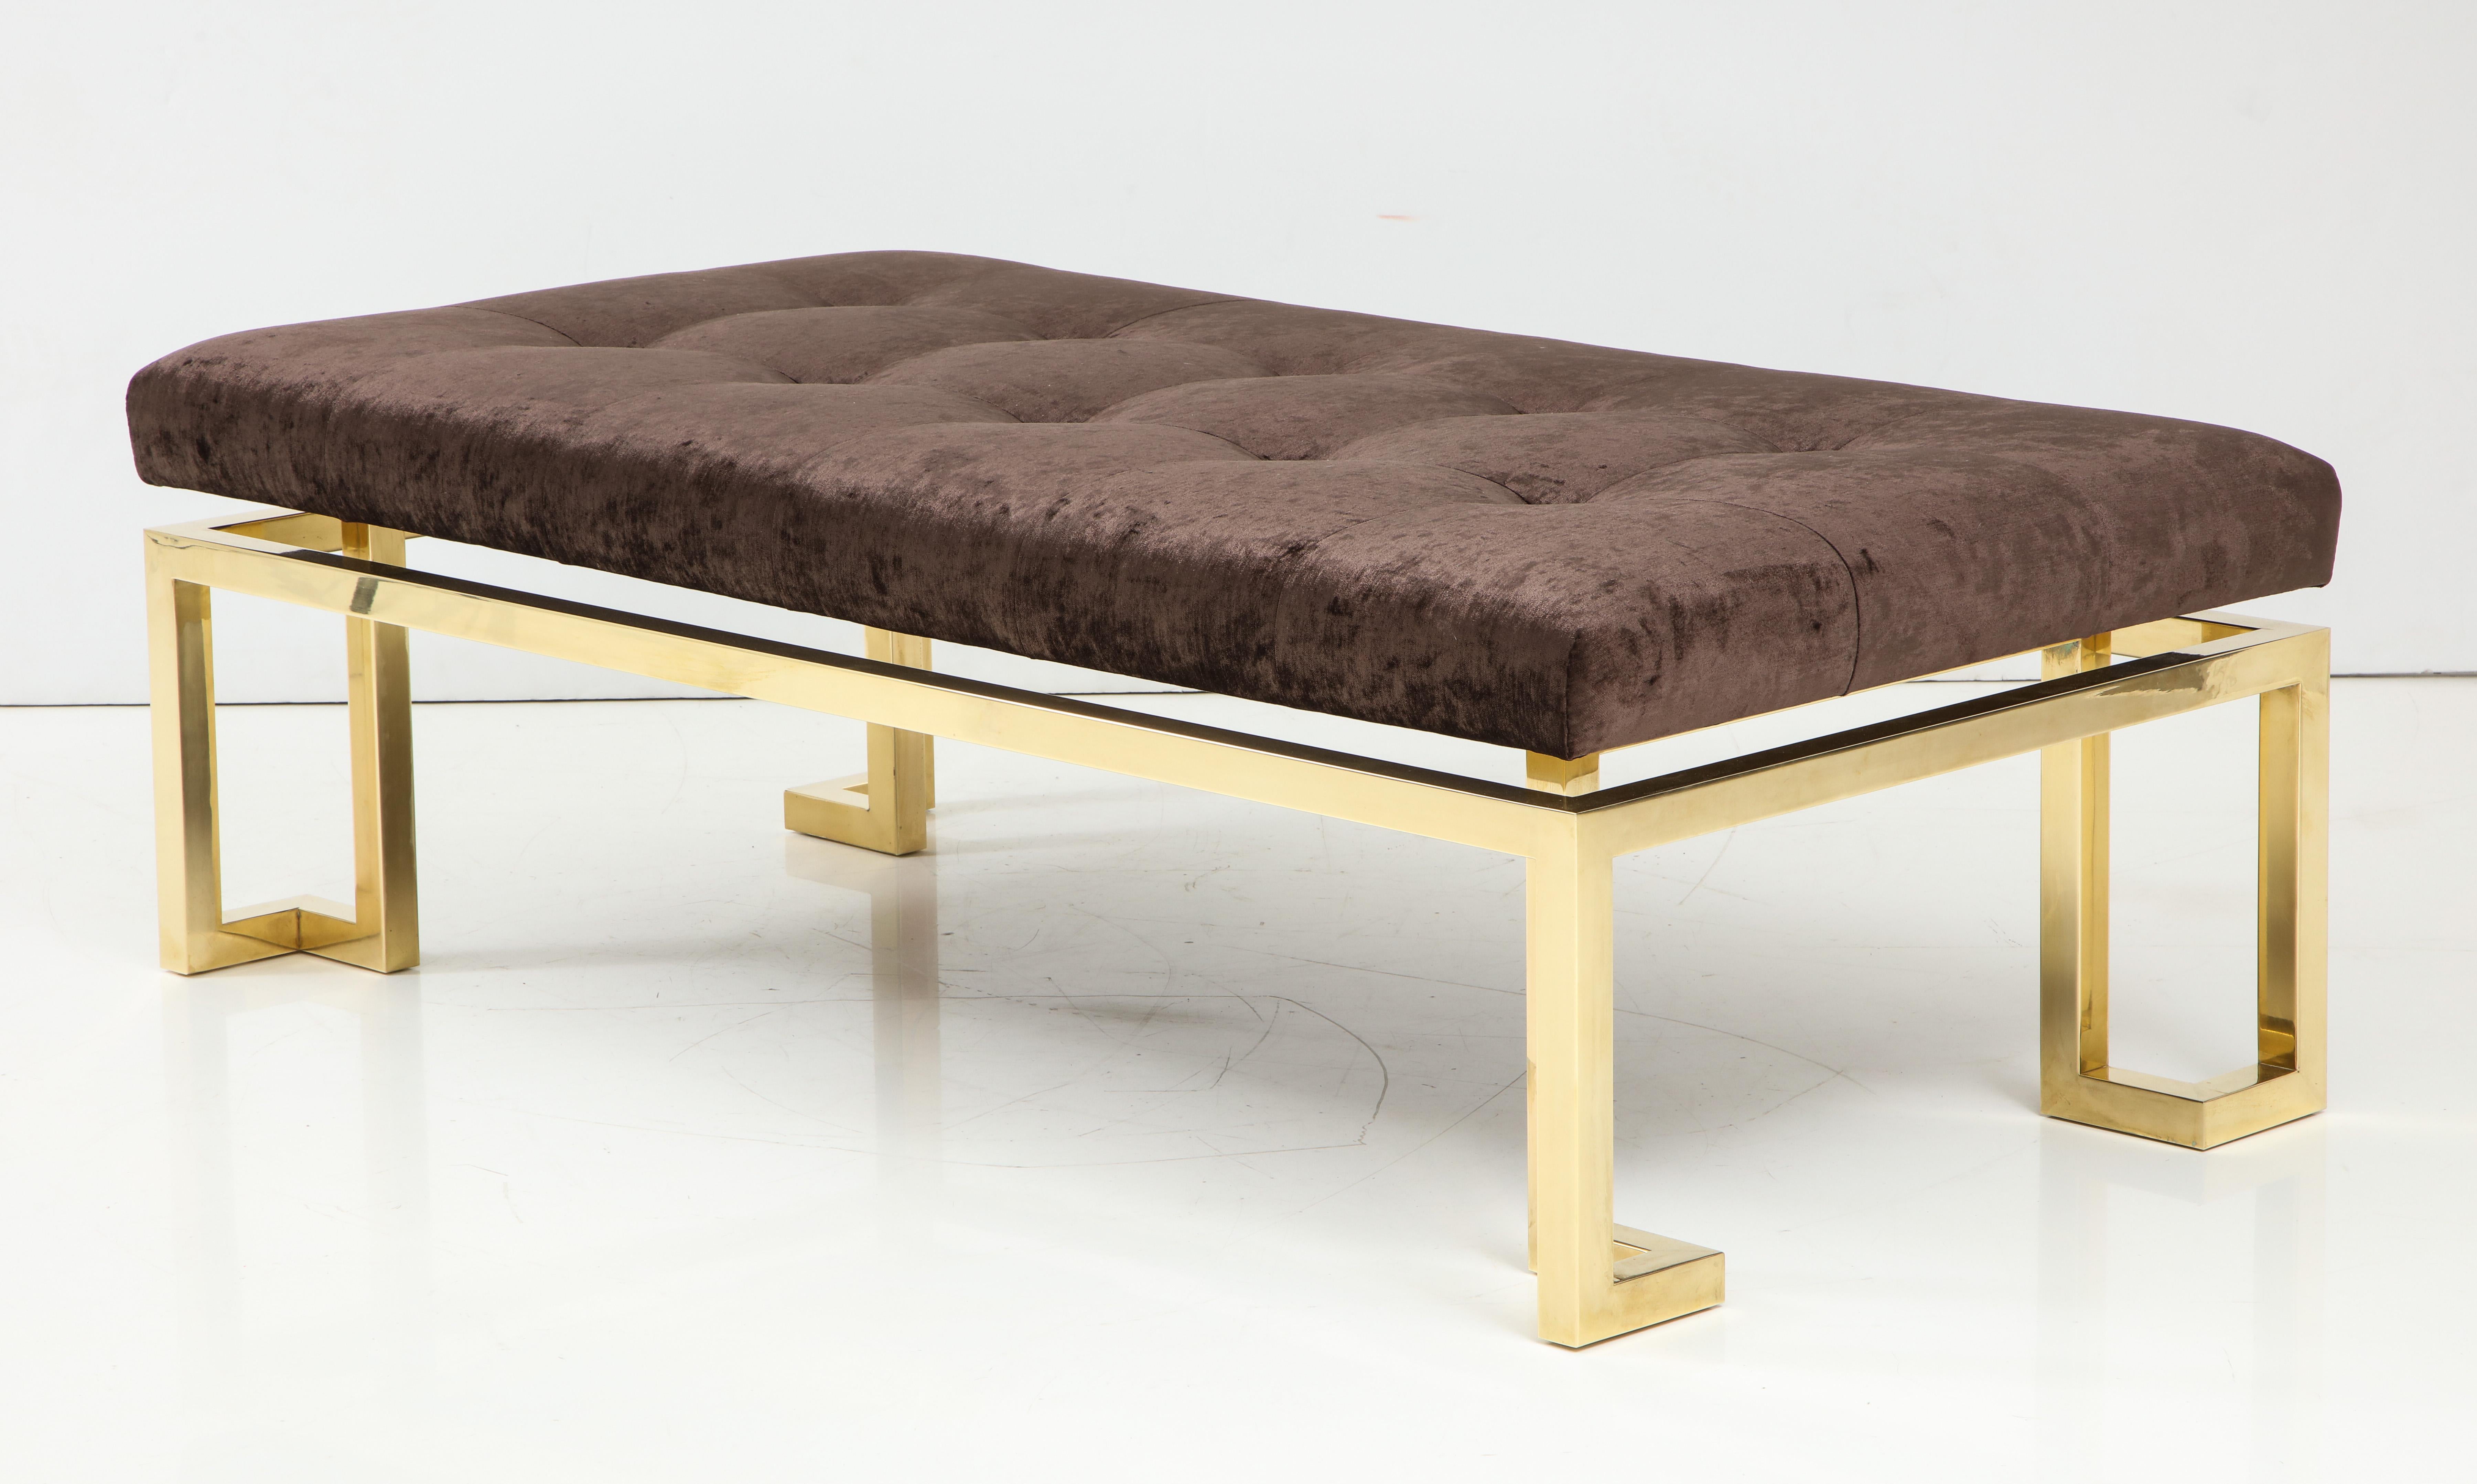 Large polished brass Greek key upholstered bench.
The heavy brass frame supports the newly reupholstered biscuit tufted
top which is in a rich chocolate brown velvet fabric.